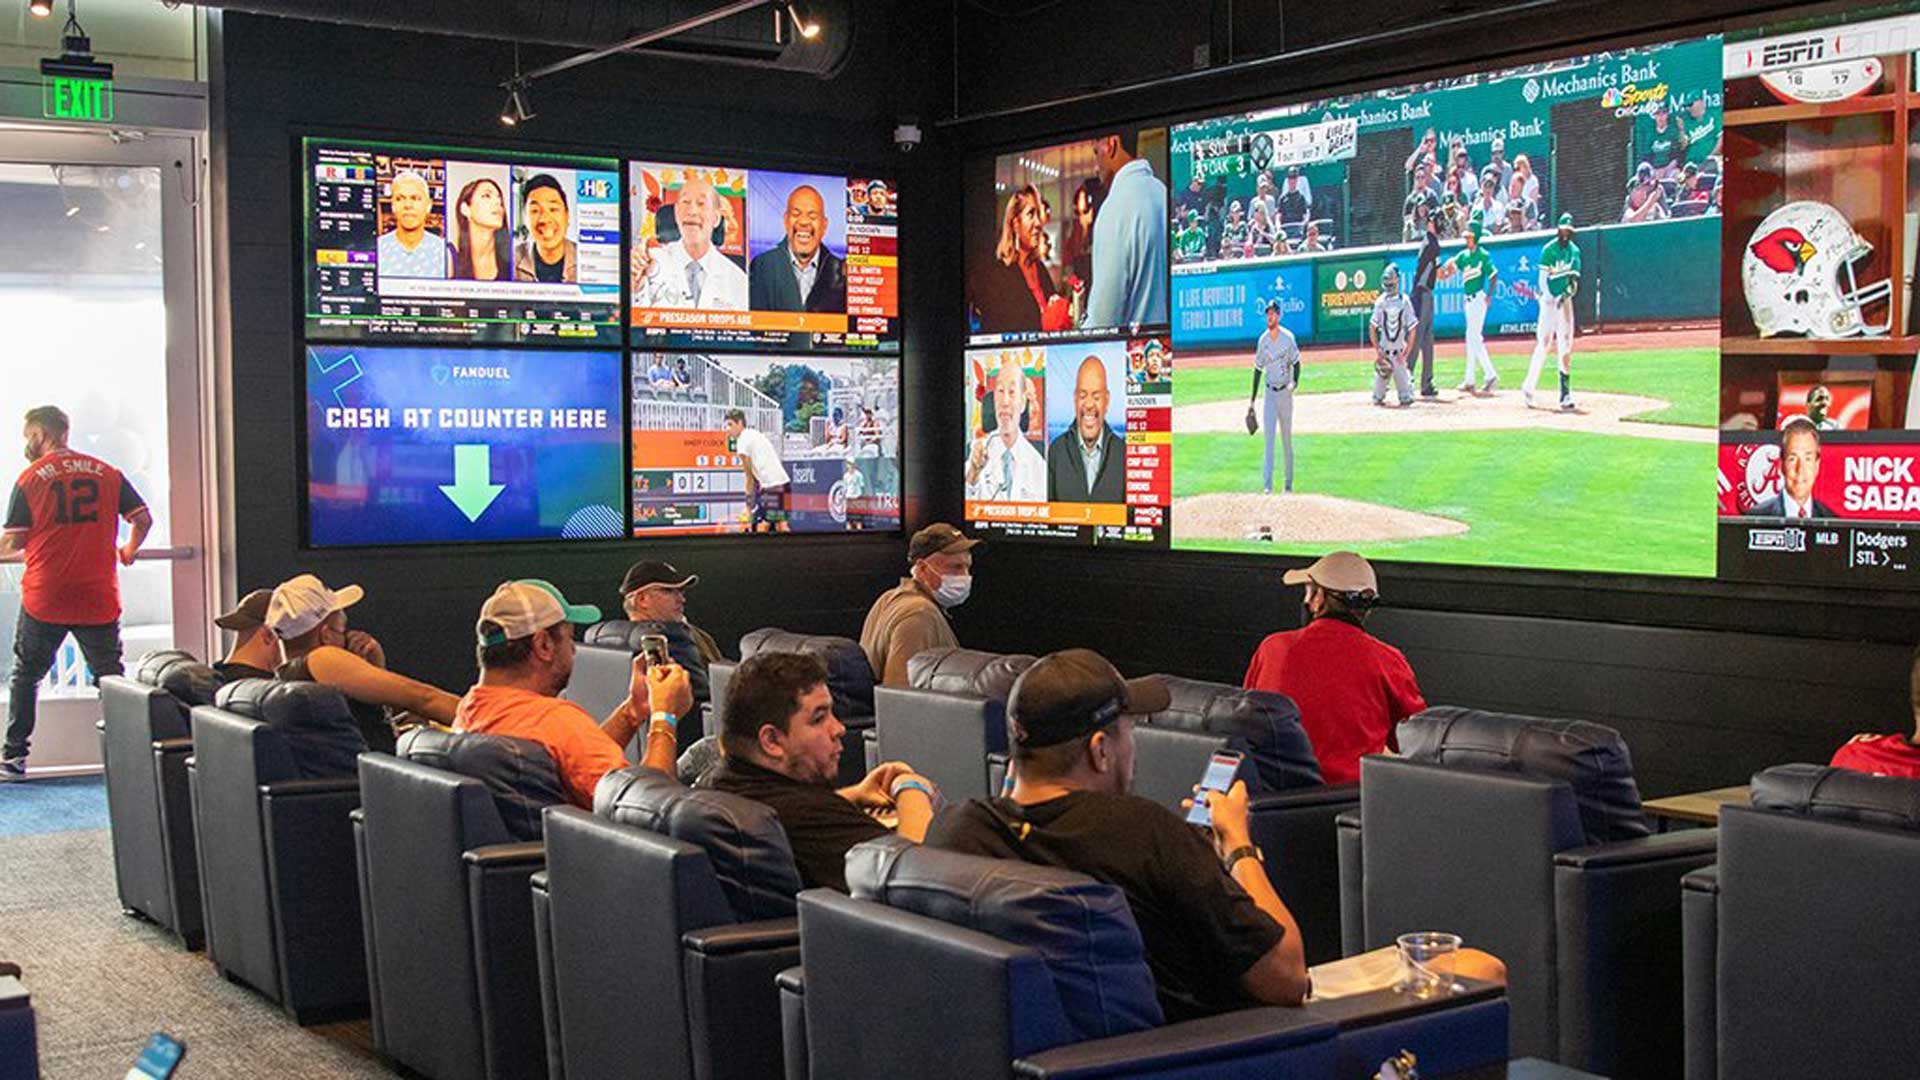 Arizona has embraced the legalization of sports betting, and sites including FanDuel at Footprint Center have helped the state become second fastest in the nation to reach a billion dollars in total wagers.